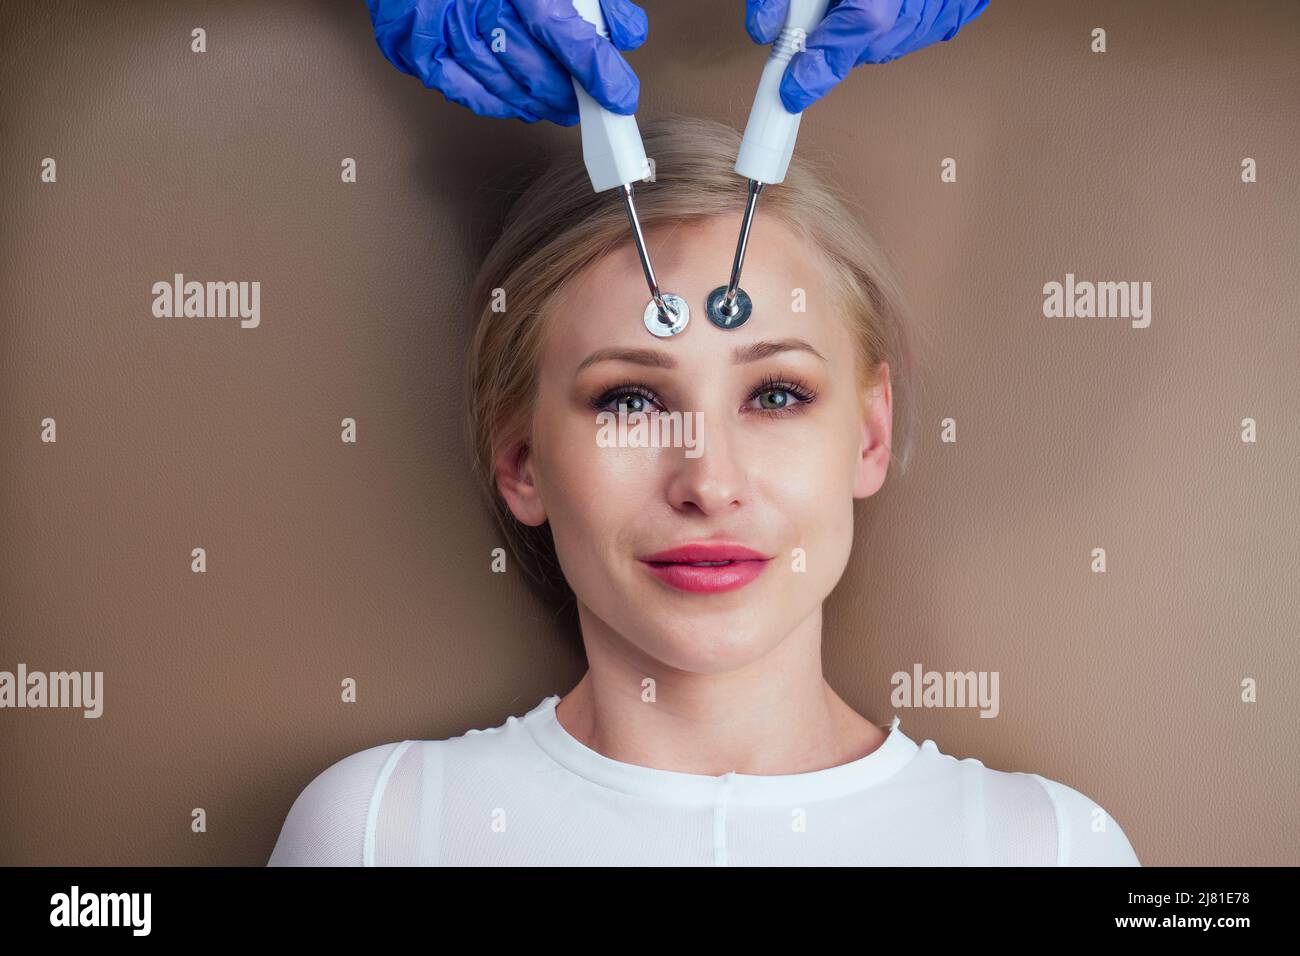 beauty aesthetic spa salon .blonde female getting instrument facial massaging with microcurrent electro instrument device. Stock Photo